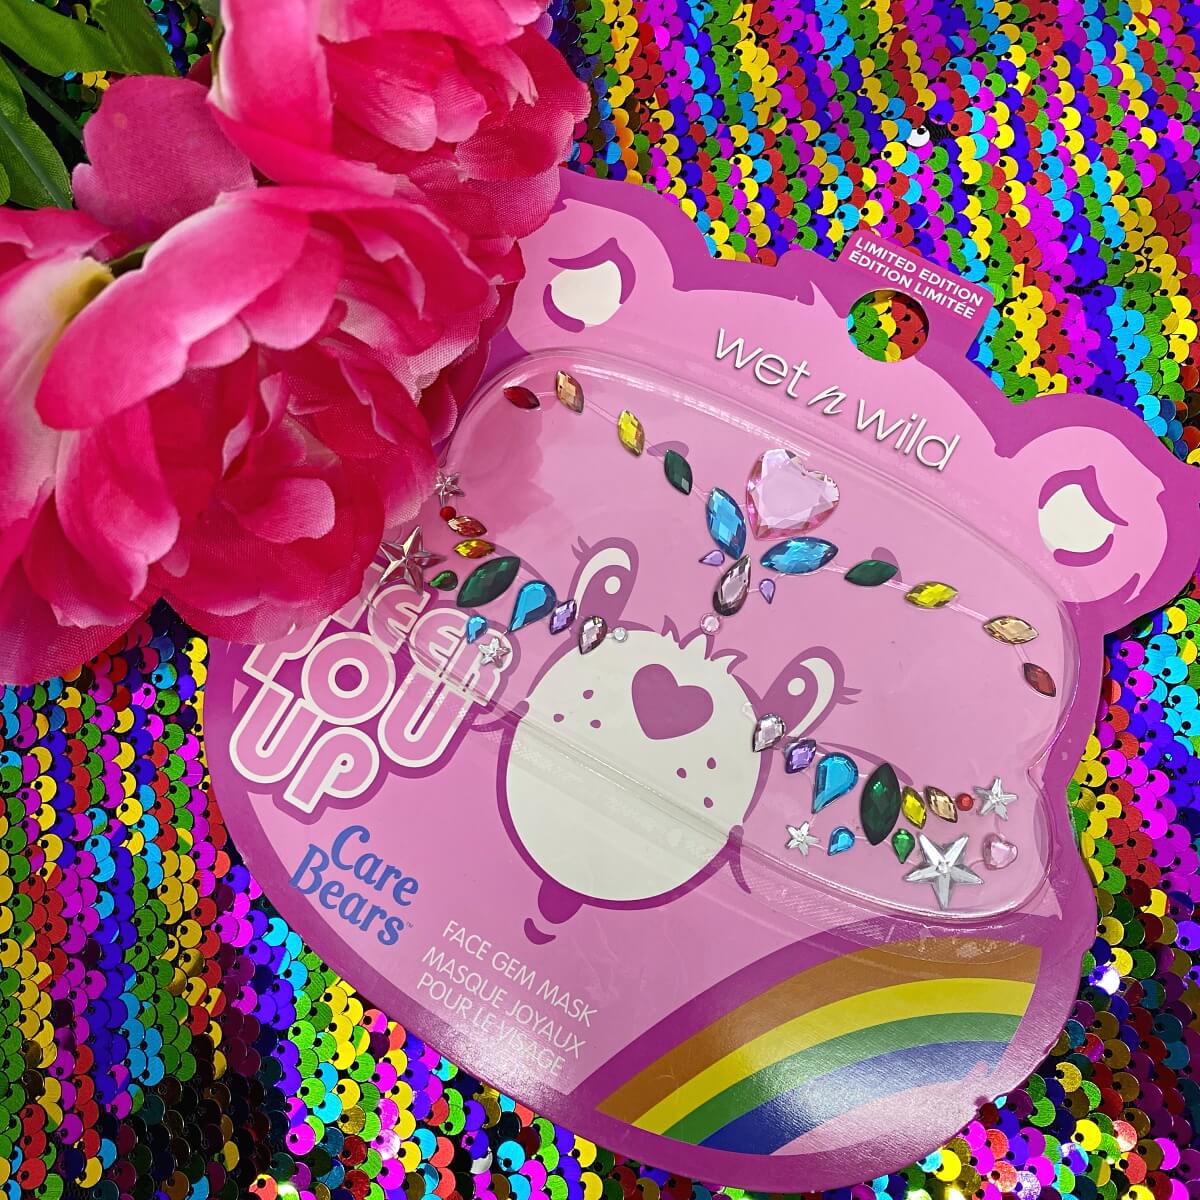 wet n wild Care Bears Cheer You Up Face Gem Mask